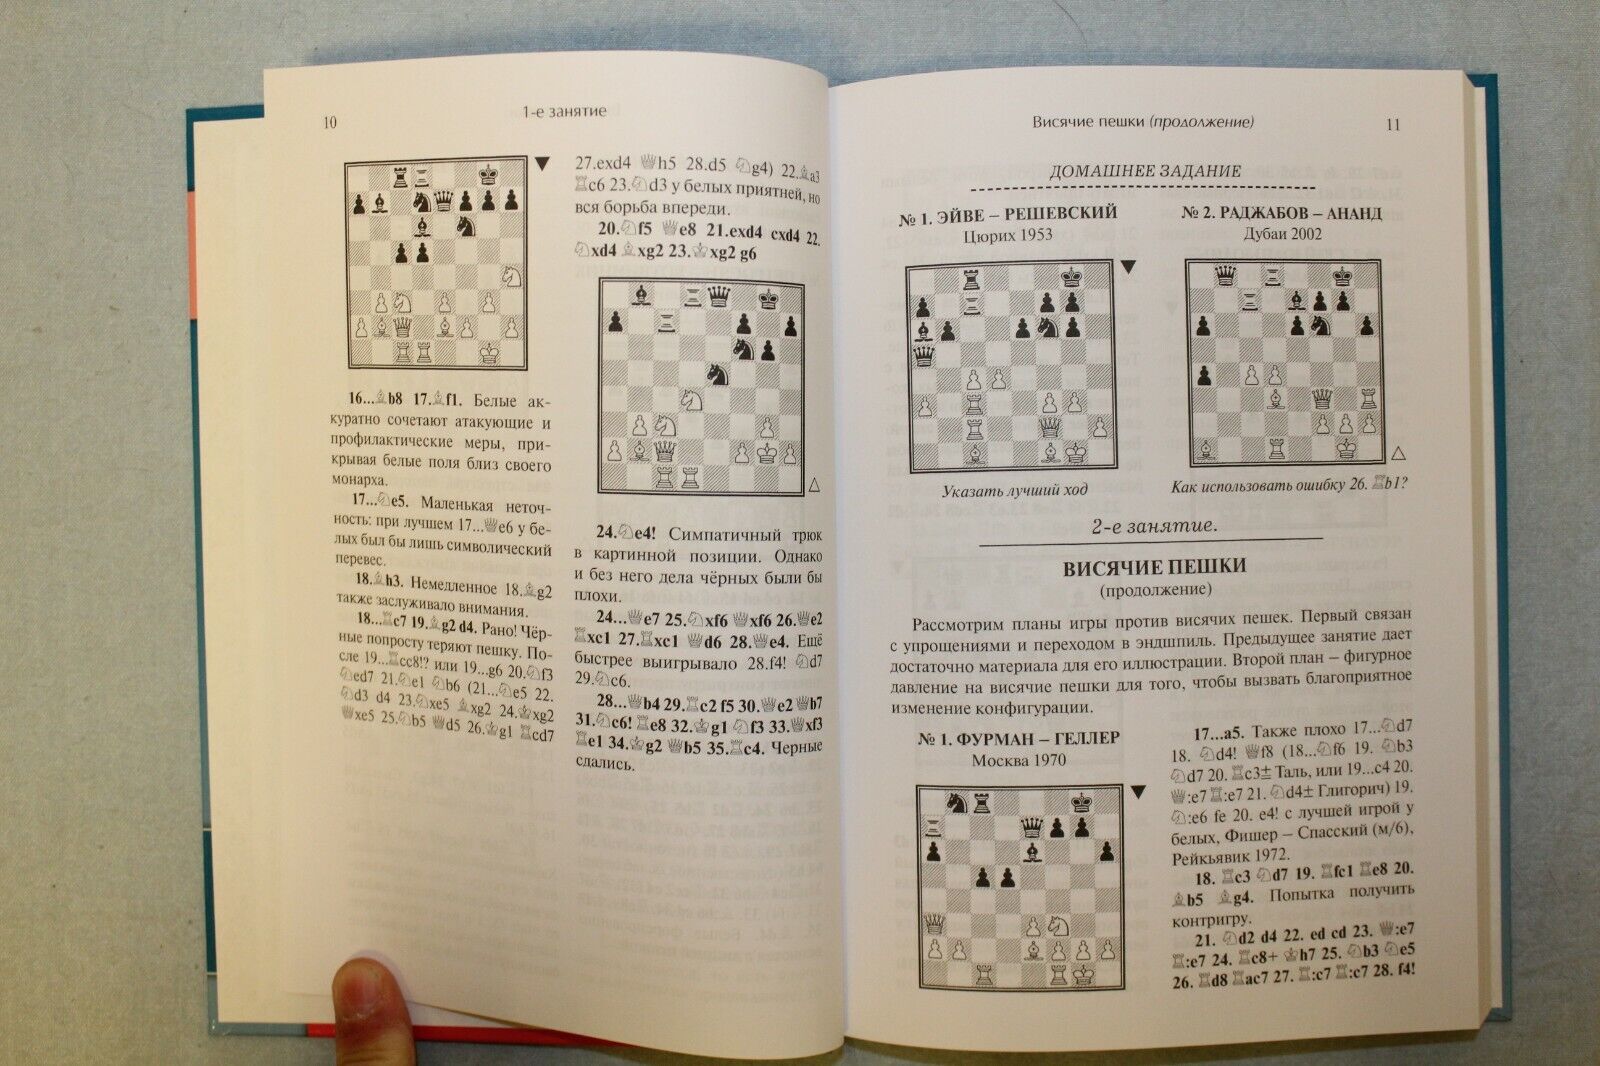 10667.2 Books by V. Golenischev. Training Programme for Skilled Chess Players